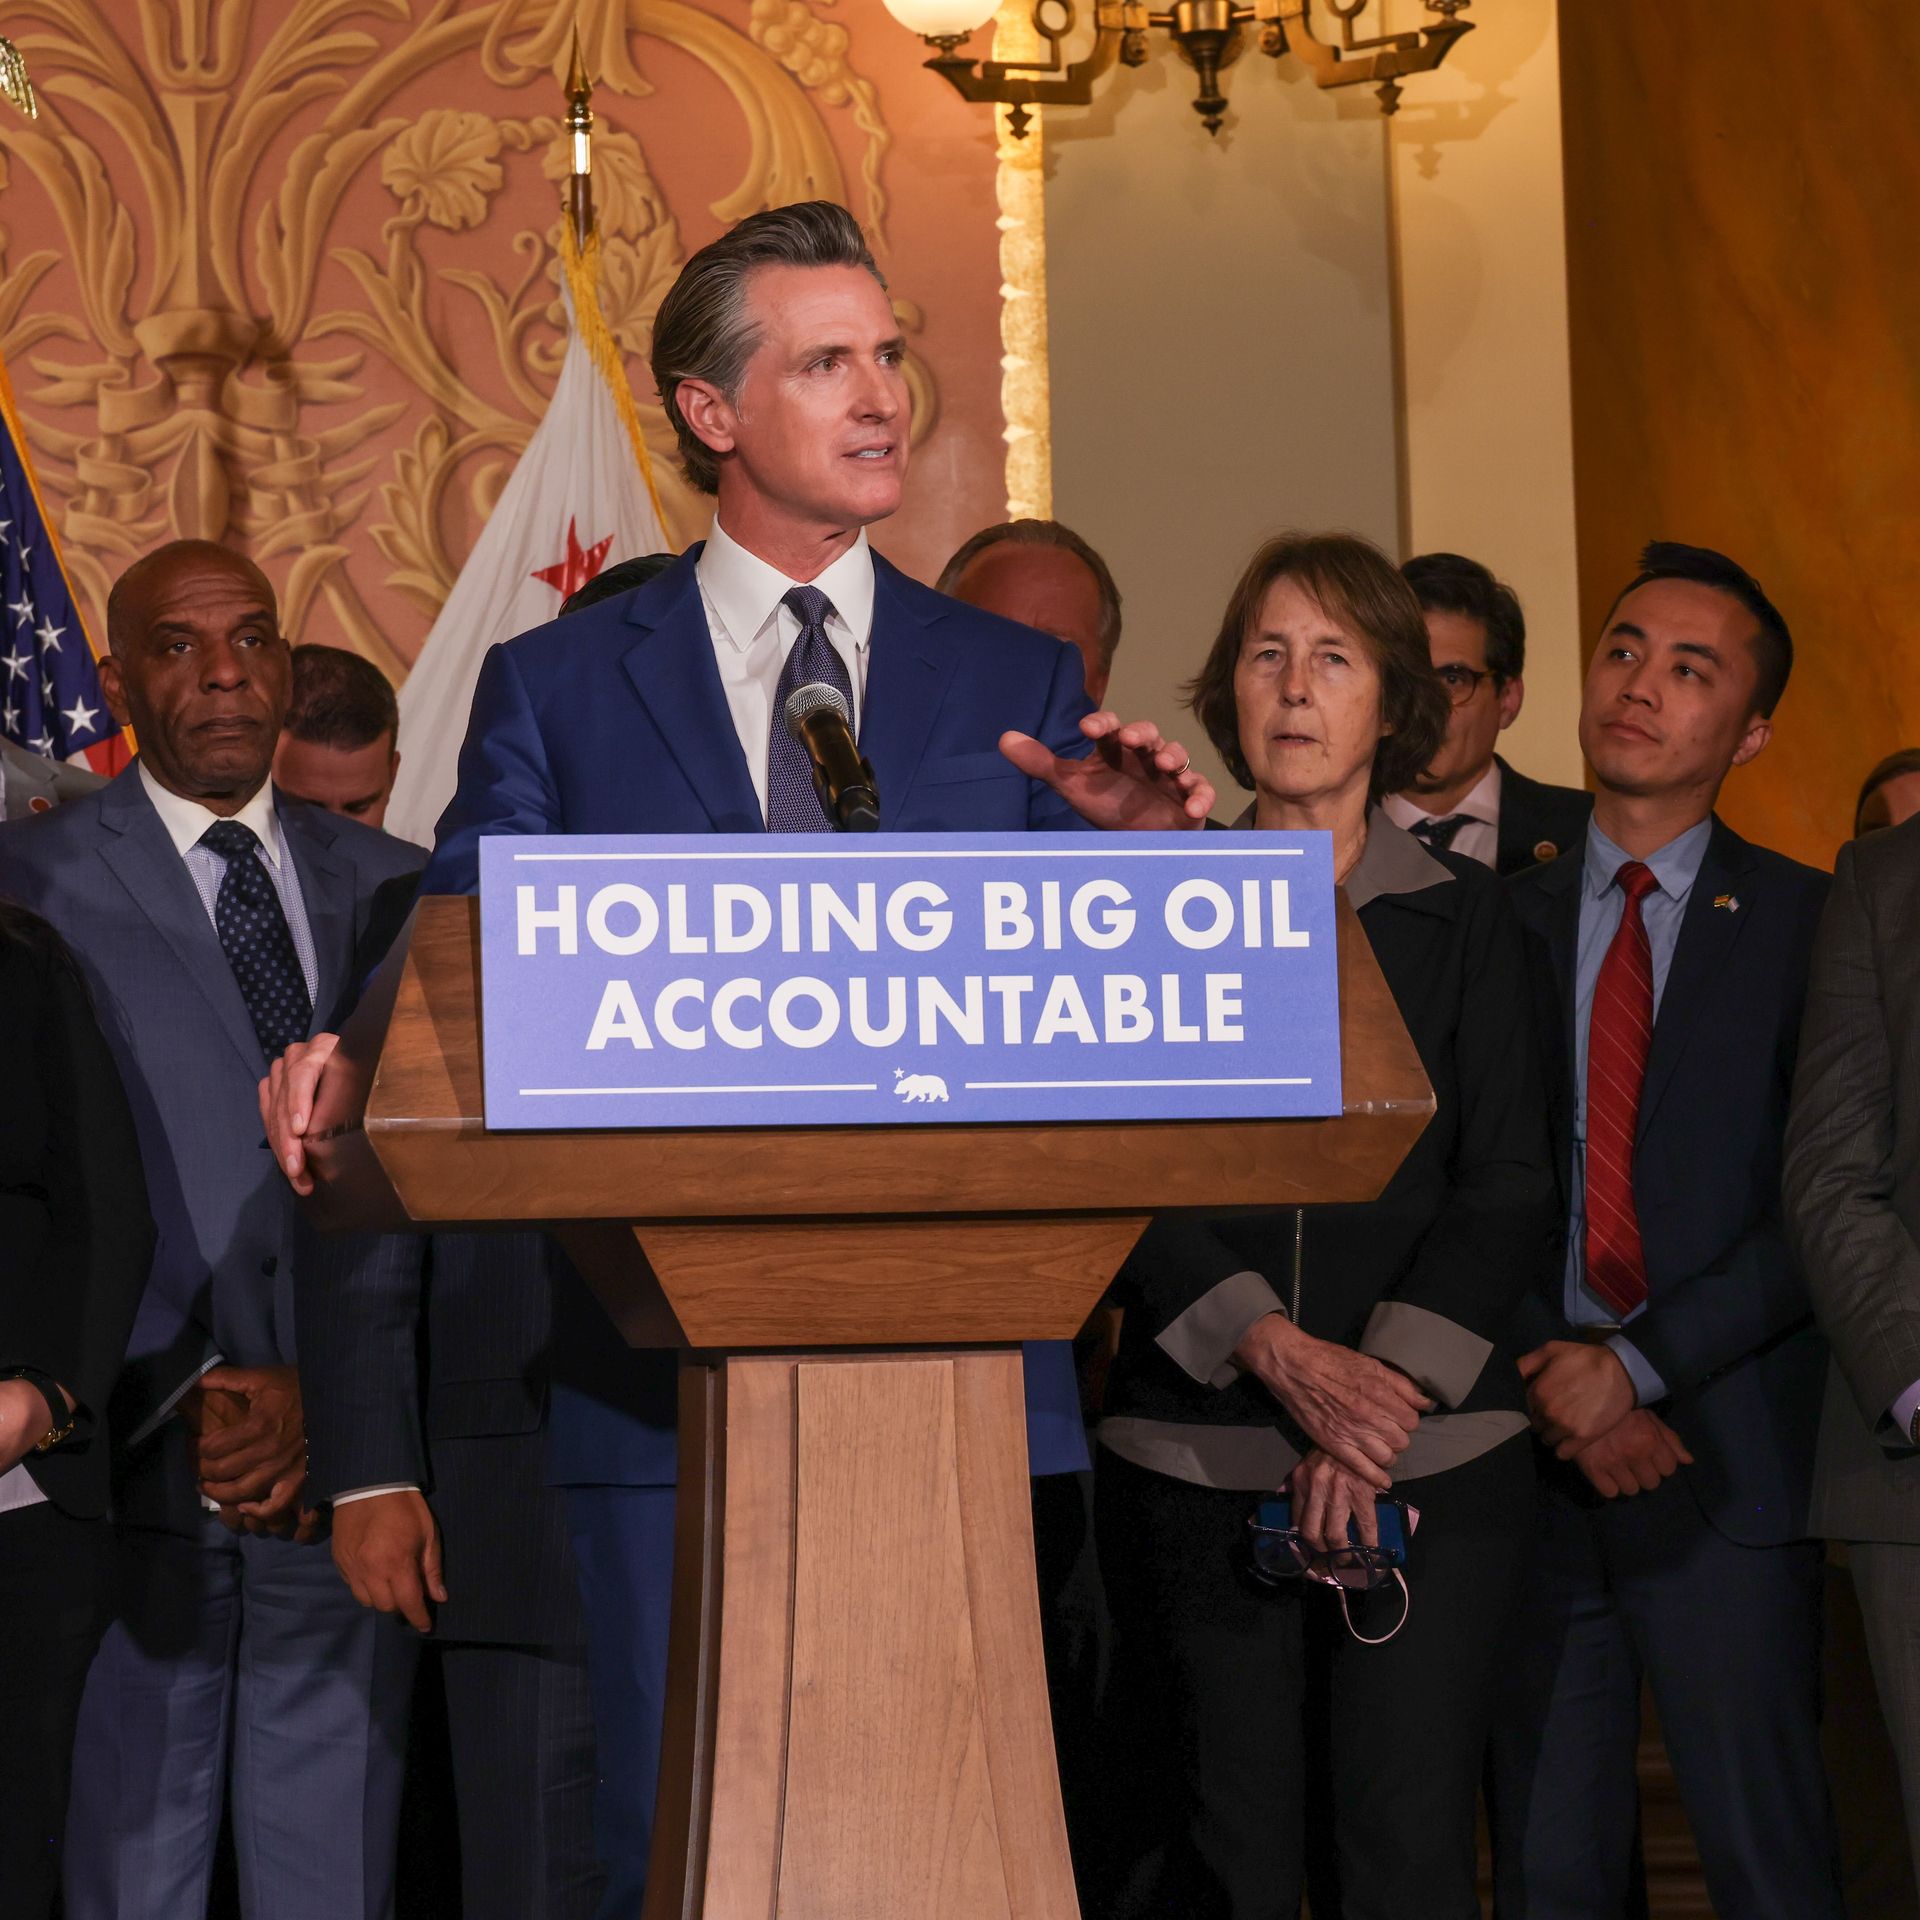 California Gov. Gavin Newsom after signing legislation to implement the strongest state-level oversight and accountability measures on Big Oil in the nation.